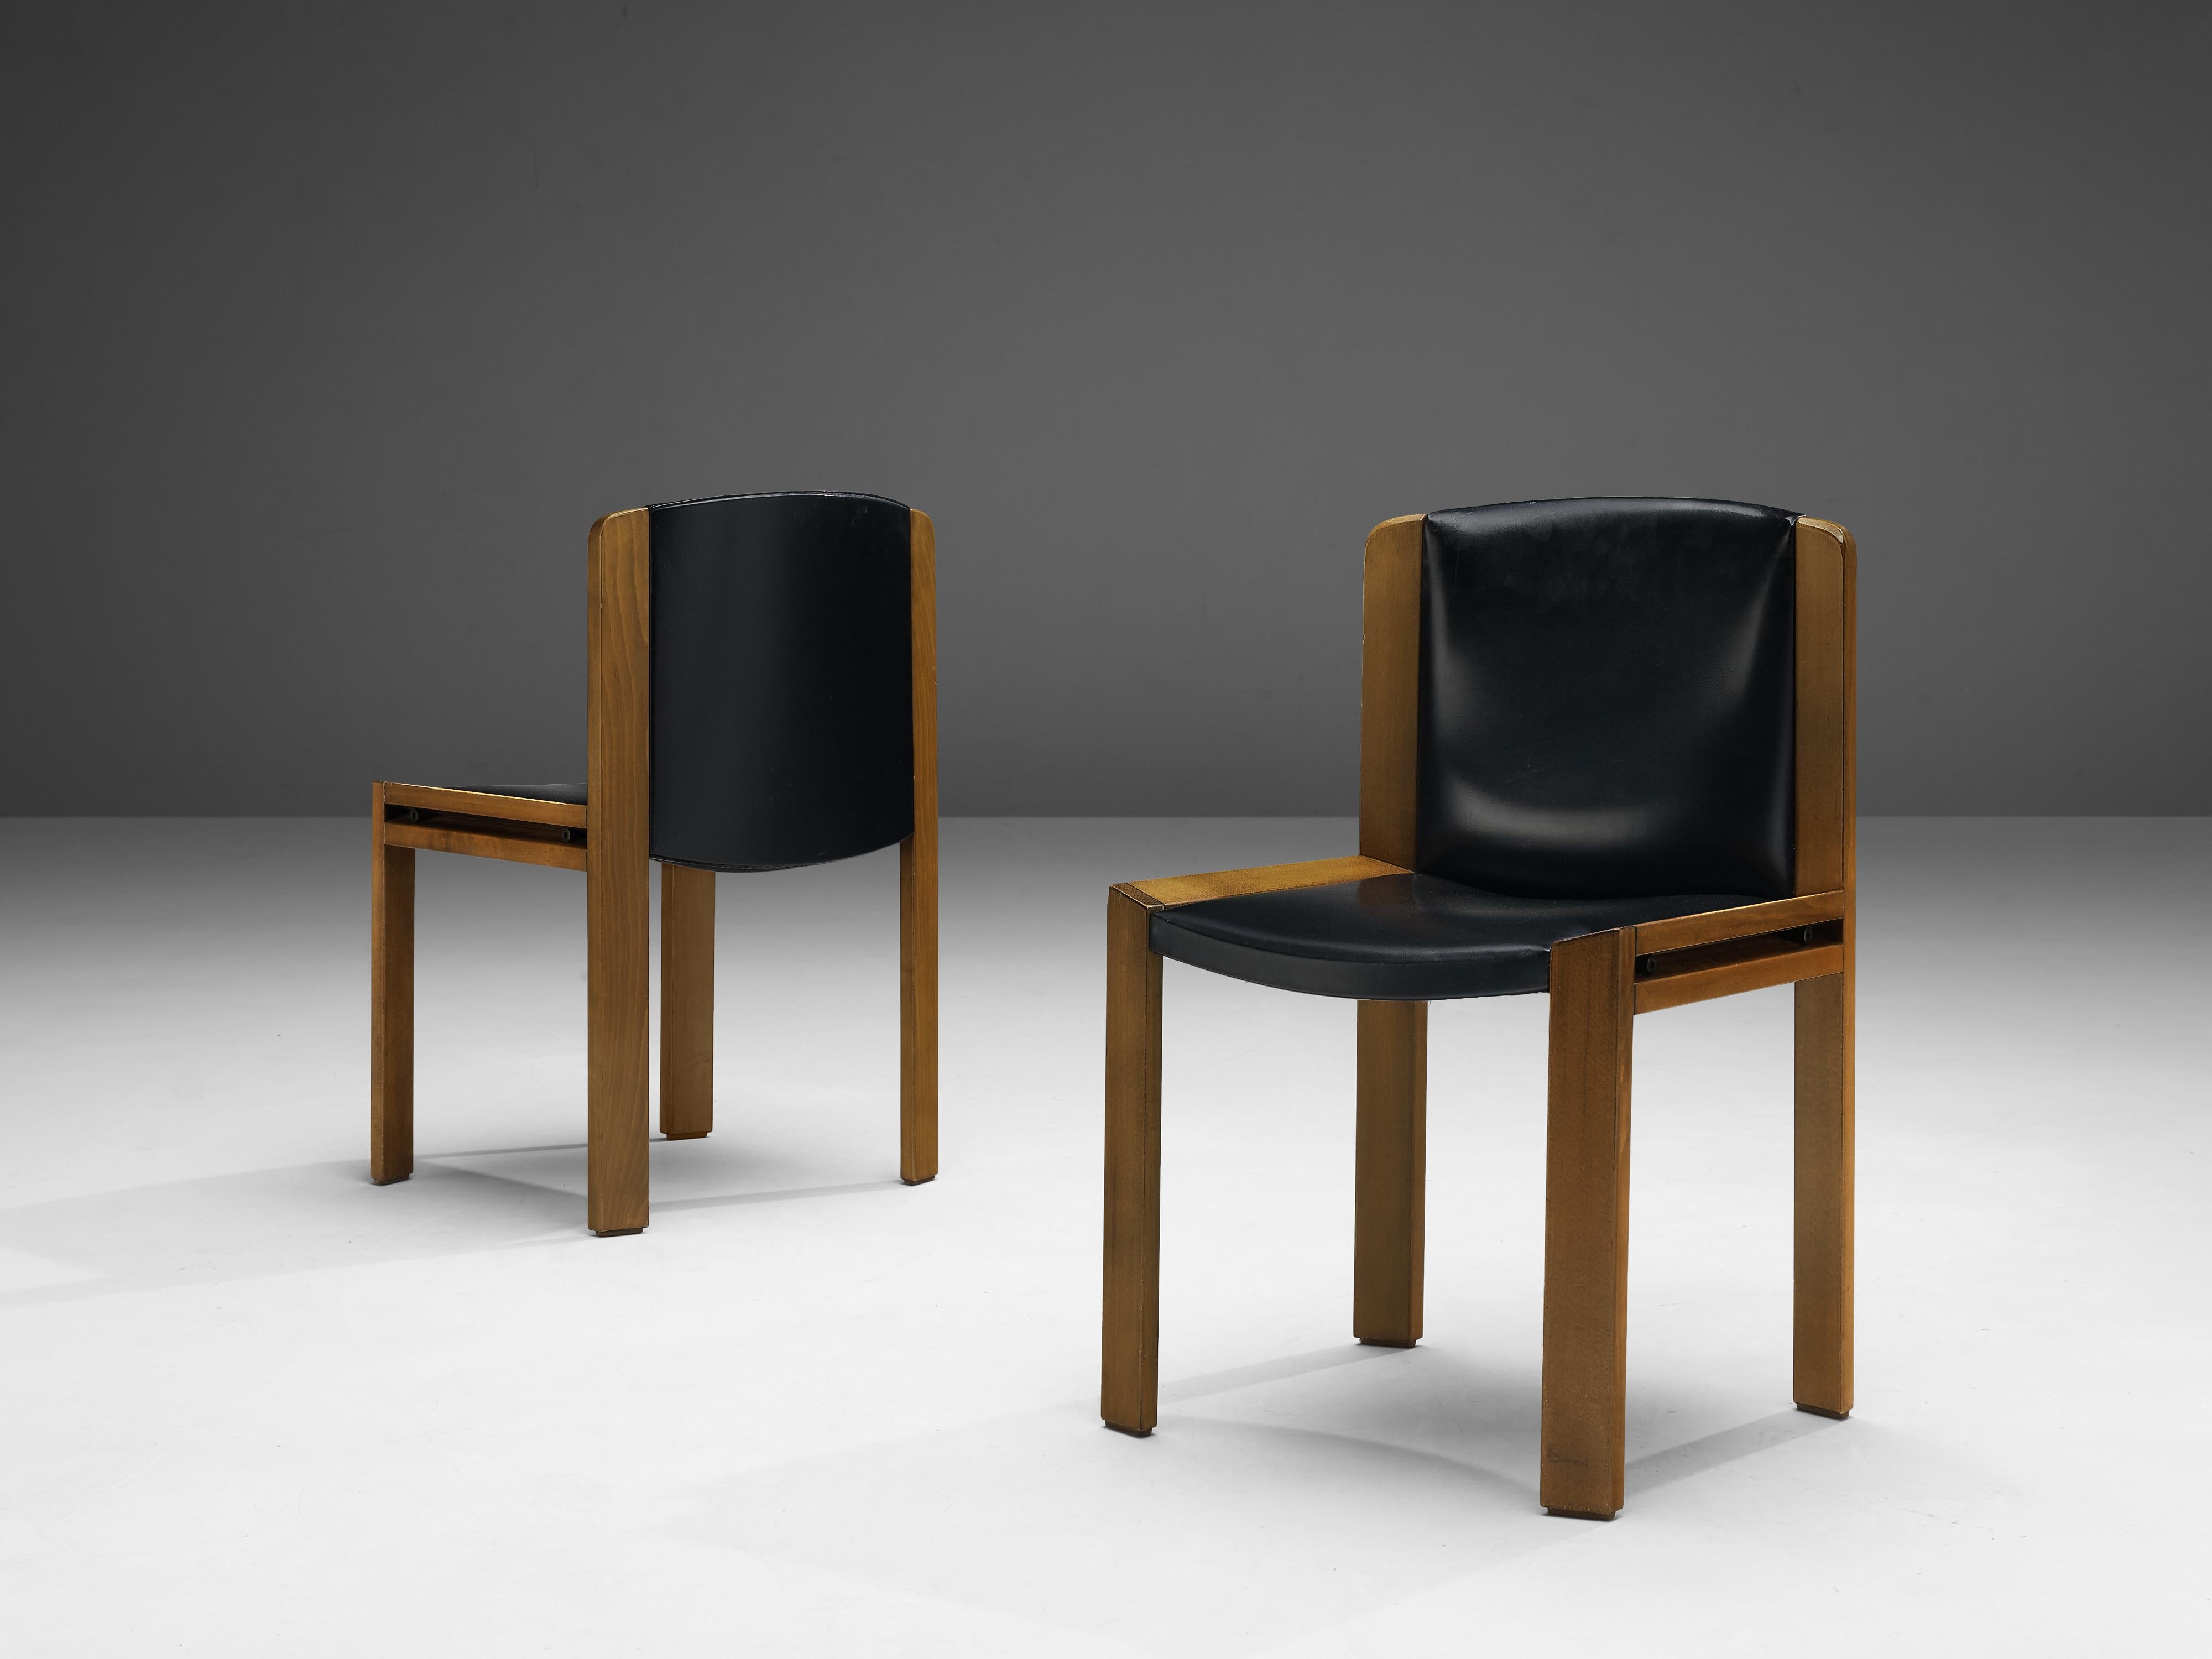 Joe Colombo for Pozzi, pair of dining chairs model '300', leatherette, wood, Italy, 1966.

Functionalist pair of dining chairs designed by Joe Colombo in 1966. Colombo's fascination with functionality meant he always focused on the user, which